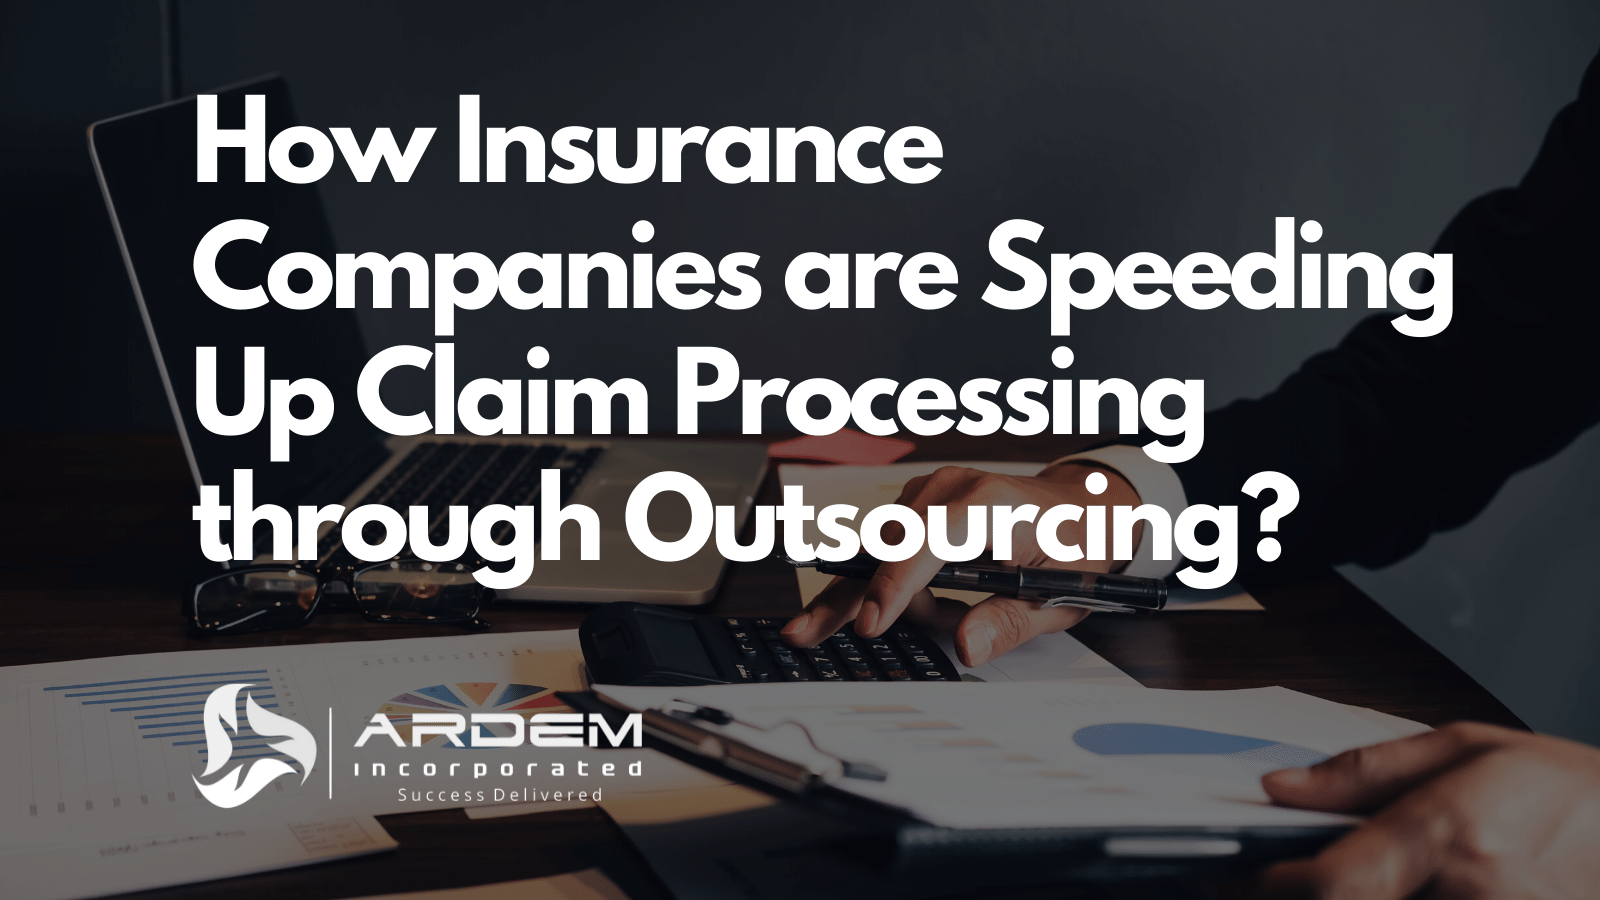 Insurance Companies Claim Processing Outsourcing Blog